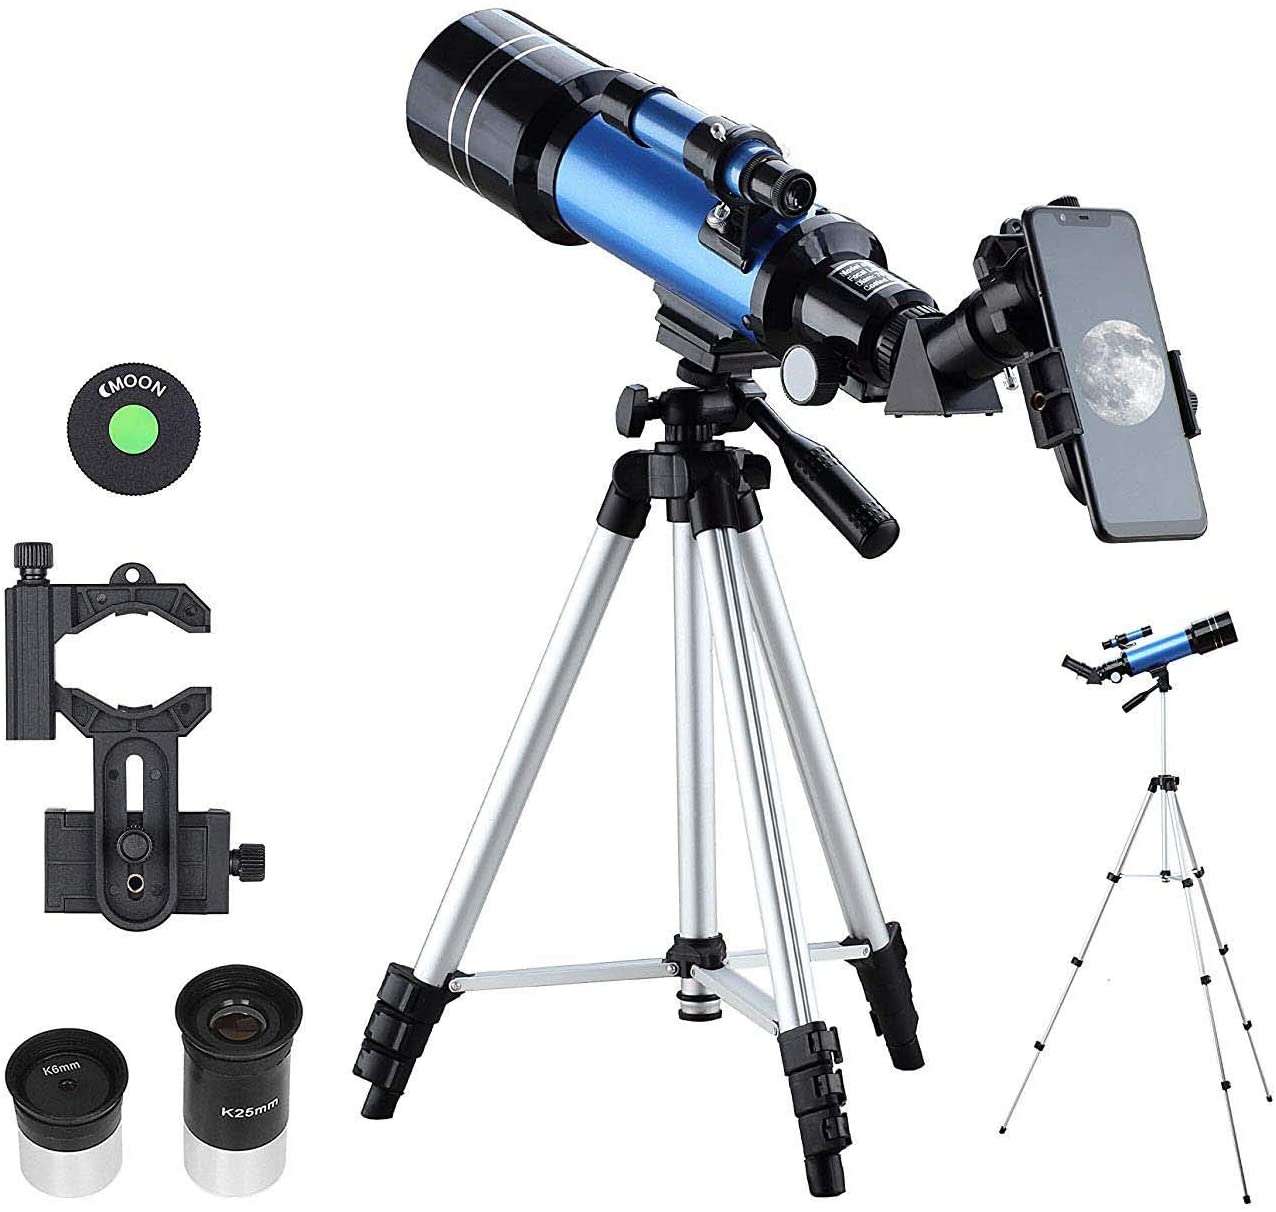 Portable Travel Telescope with A Finder Scope Phone Adapter Bling Telescope for Kids Beginners,70mm Aperture 700mm Astronomical Refractor Telescope 